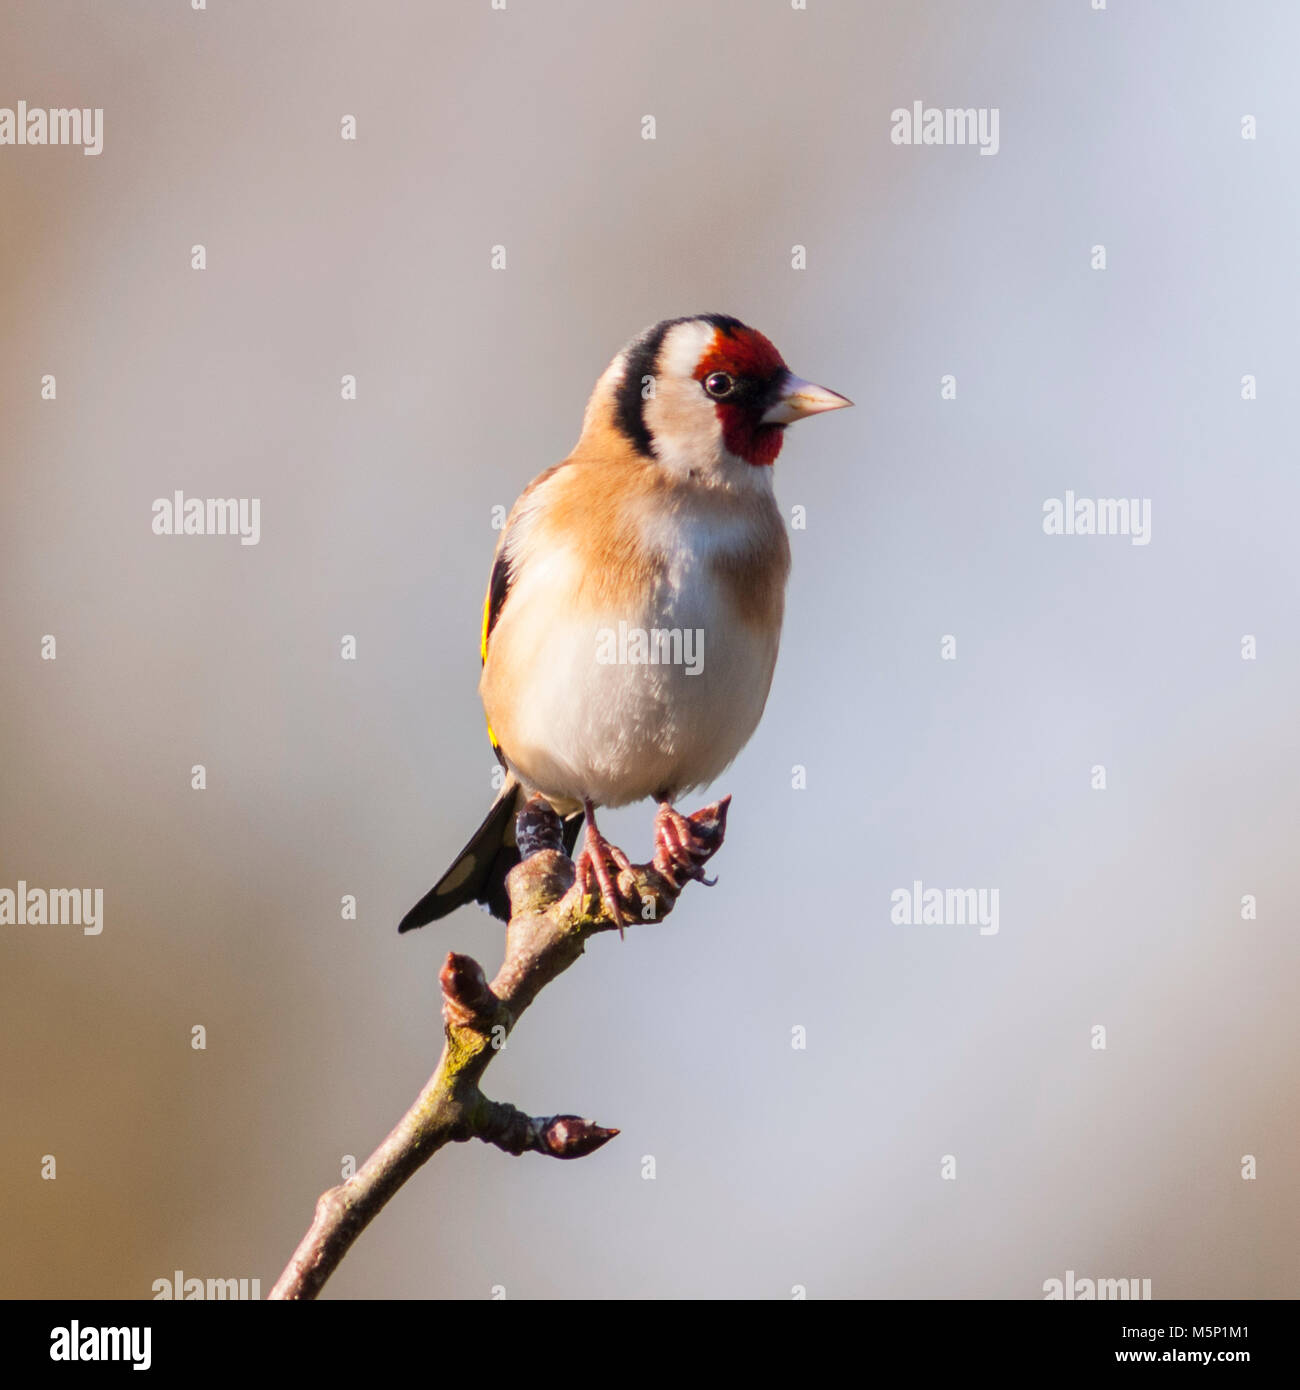 Norfolk , England , Uk. 25th February 2018. A Goldfinch (Carduelis carduelis) feeding in freezing conditions in a Norfolk garden. Credit: Tim Oram/Alamy Live News Stock Photo